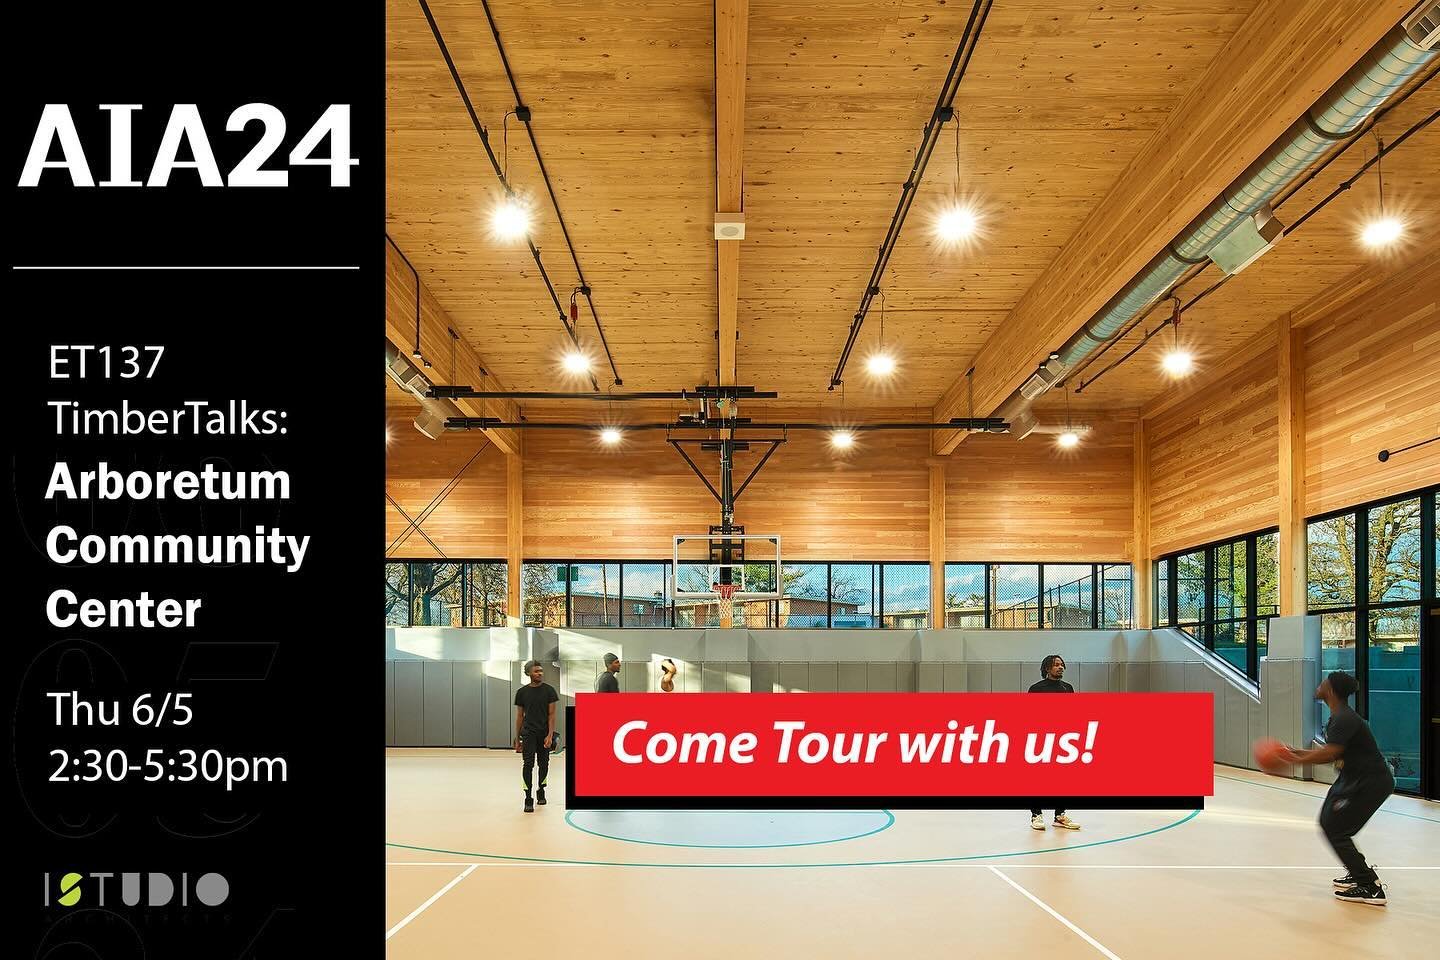 Come Tour the first Mass Timber Community Center in the nation&rsquo;s capital.
Link in bio

#aia #conference #2024 @dcdgs @dcdpr 
@aia_washdc @aiadcsfx @aianational @vatech  @aianorthernvirginia @aiapotomacvalley @vt_waac @vtaad_ @vtarchschool #virg